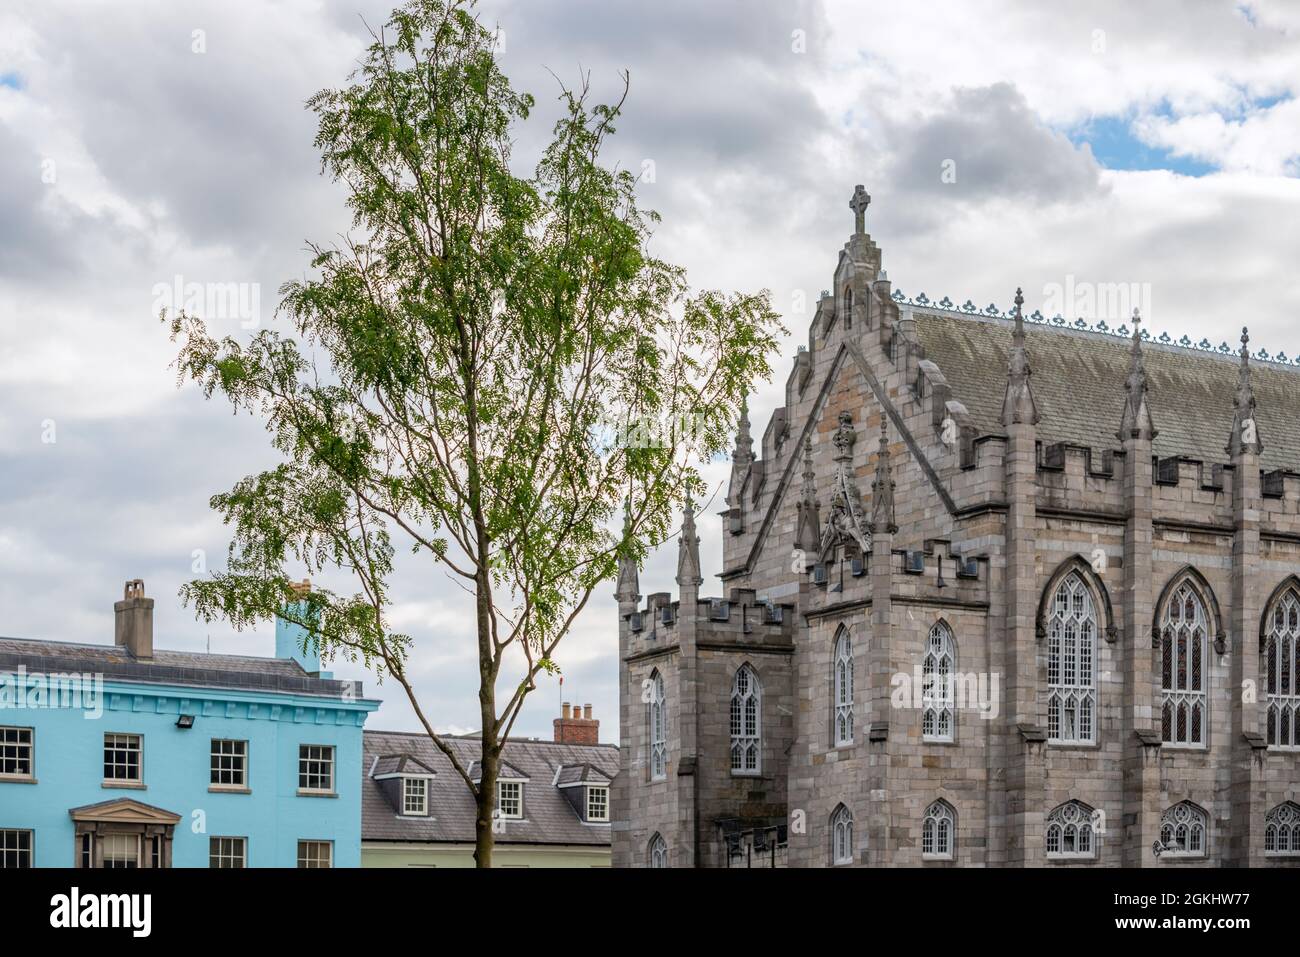 Irish neo-Gothic architecture in central Dublin on a cloudy day in late summer Stock Photo